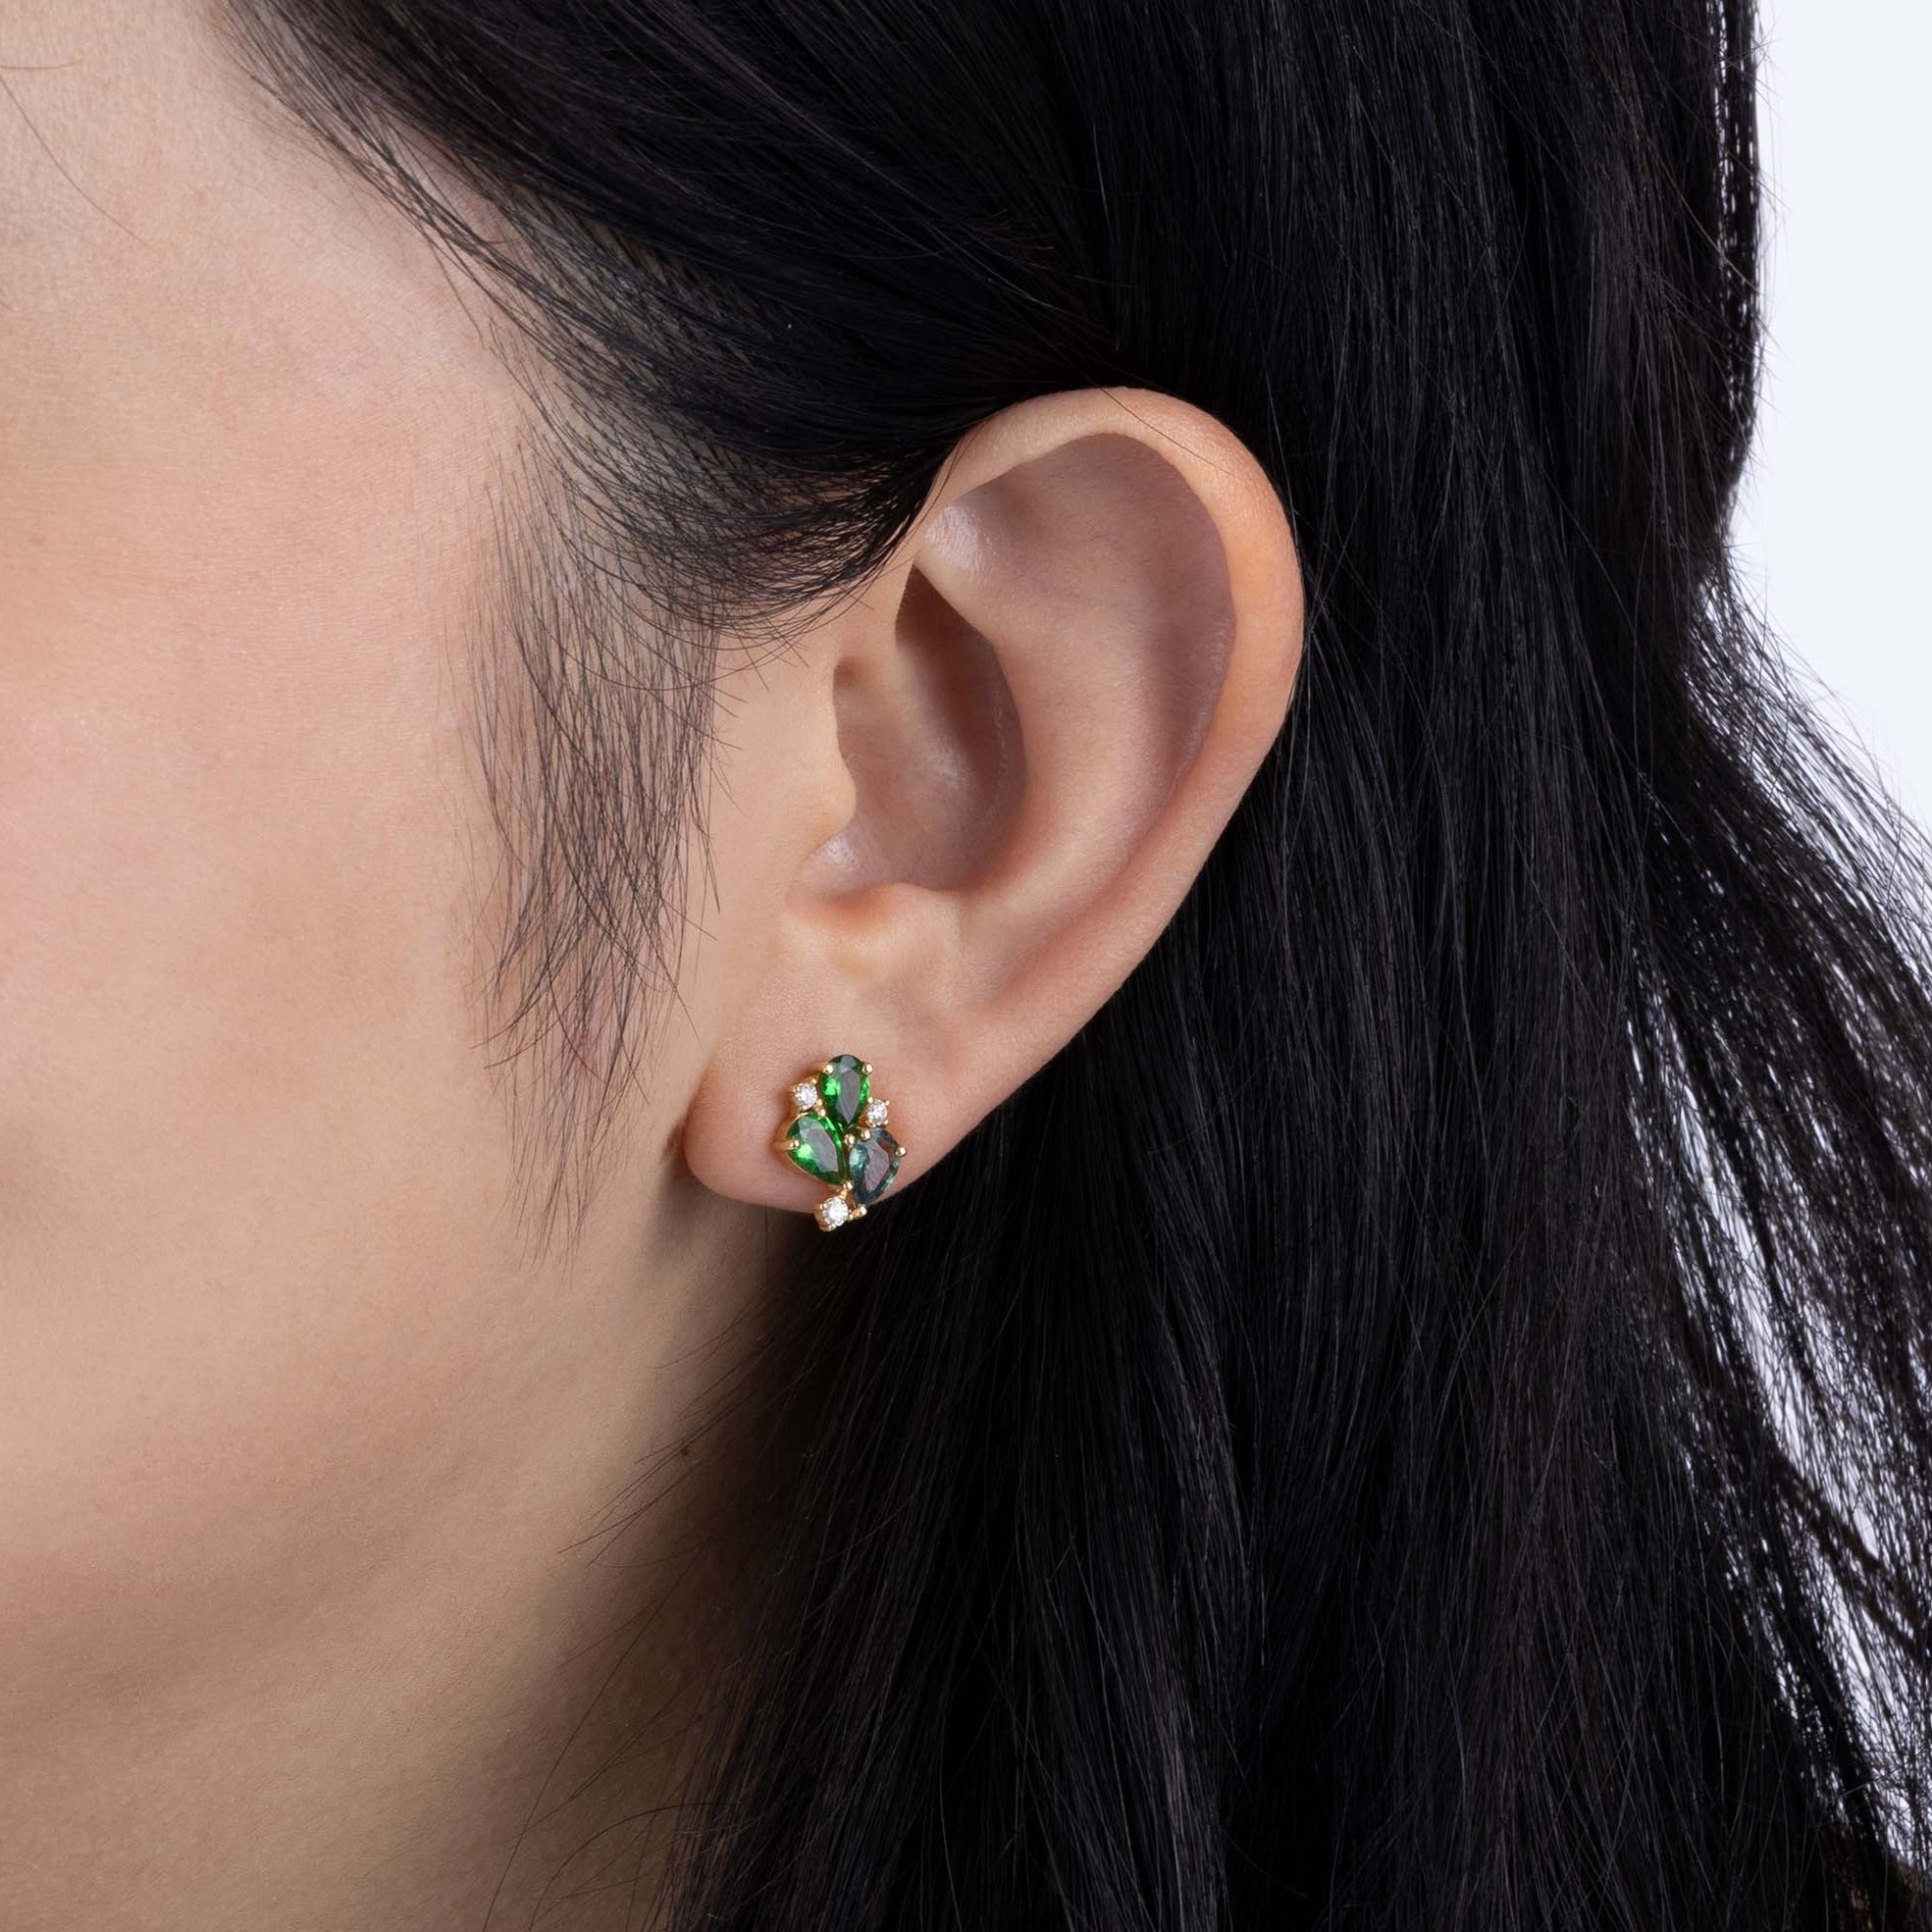 Yellow Gold Earrings with Tsavorite and Green Sapphires, and Diamonds, Small - Model shot